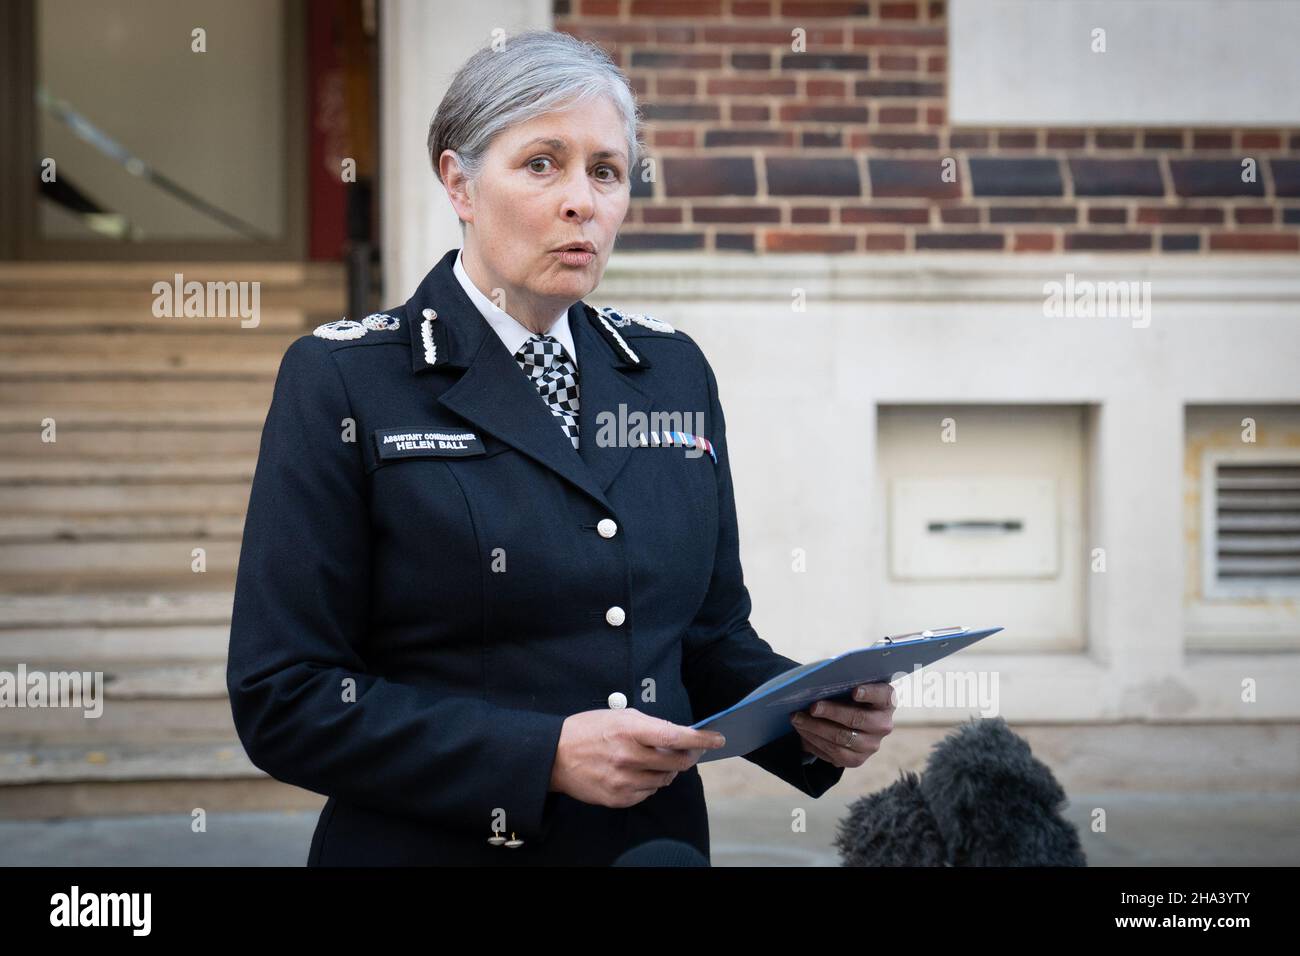 Met police assistant commissioner Helen Ball speaks to the media after the conclusion Barking Town Hall today, after an inquest jury found that police failures in the investigation into the death of Stephen Port's first victim Anthony Walgate 'probably' contributed to the death of Gabriel Kovari, the second young gay man to die in almost identical circumstances in Barking, east London. Picture date: Friday December 10, 2021. Stock Photo